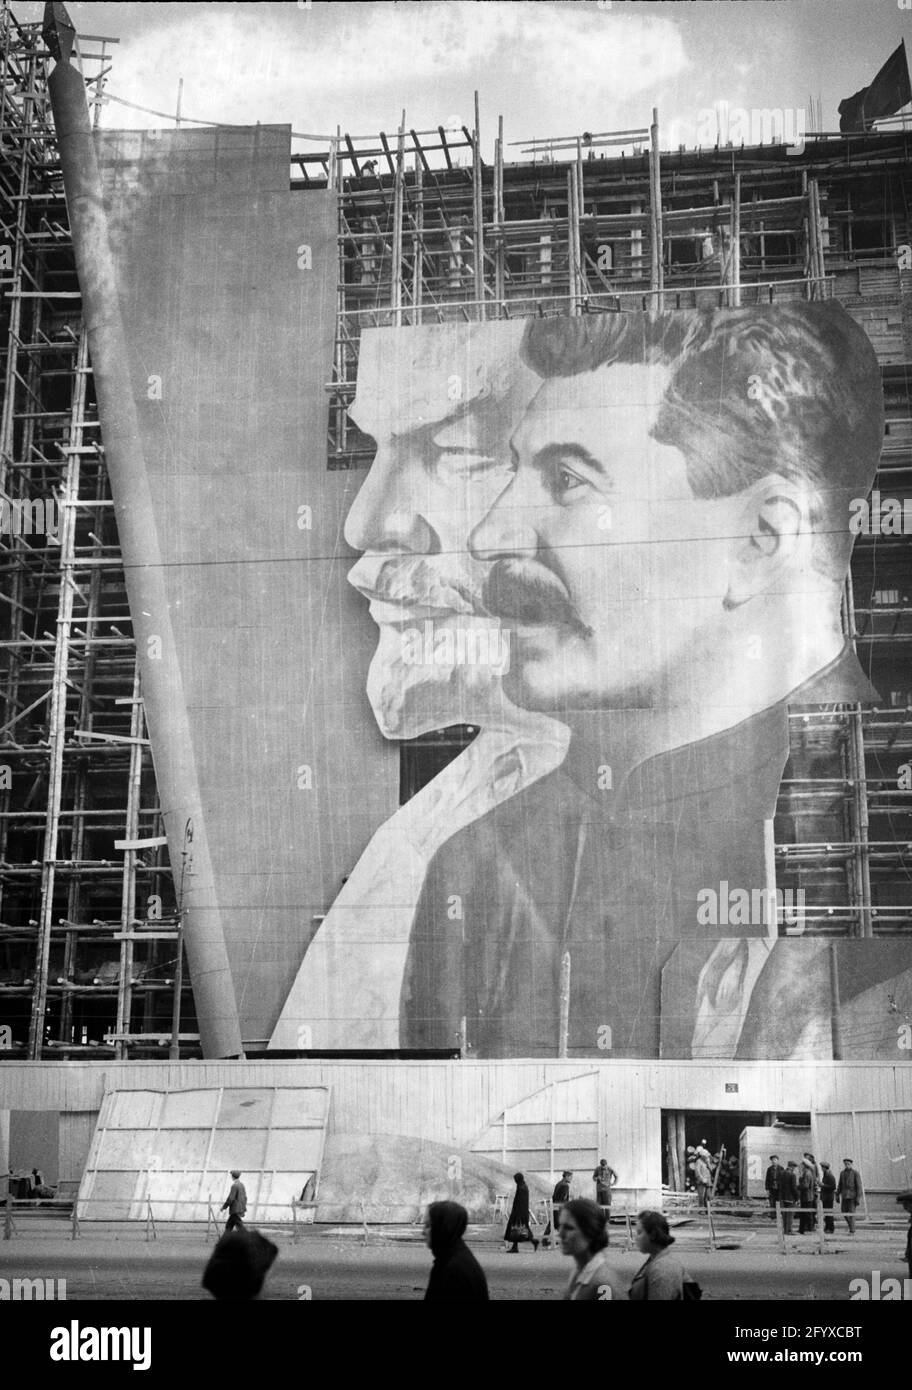 A large poster with portraits of Russian political leaders Vladimir Lenin and Joseph Stalin for the May Day parade hangs over the scaffolding of a building under construction, Moscow, Russia, 1934. (Photo by Burton Holmes) Stock Photo